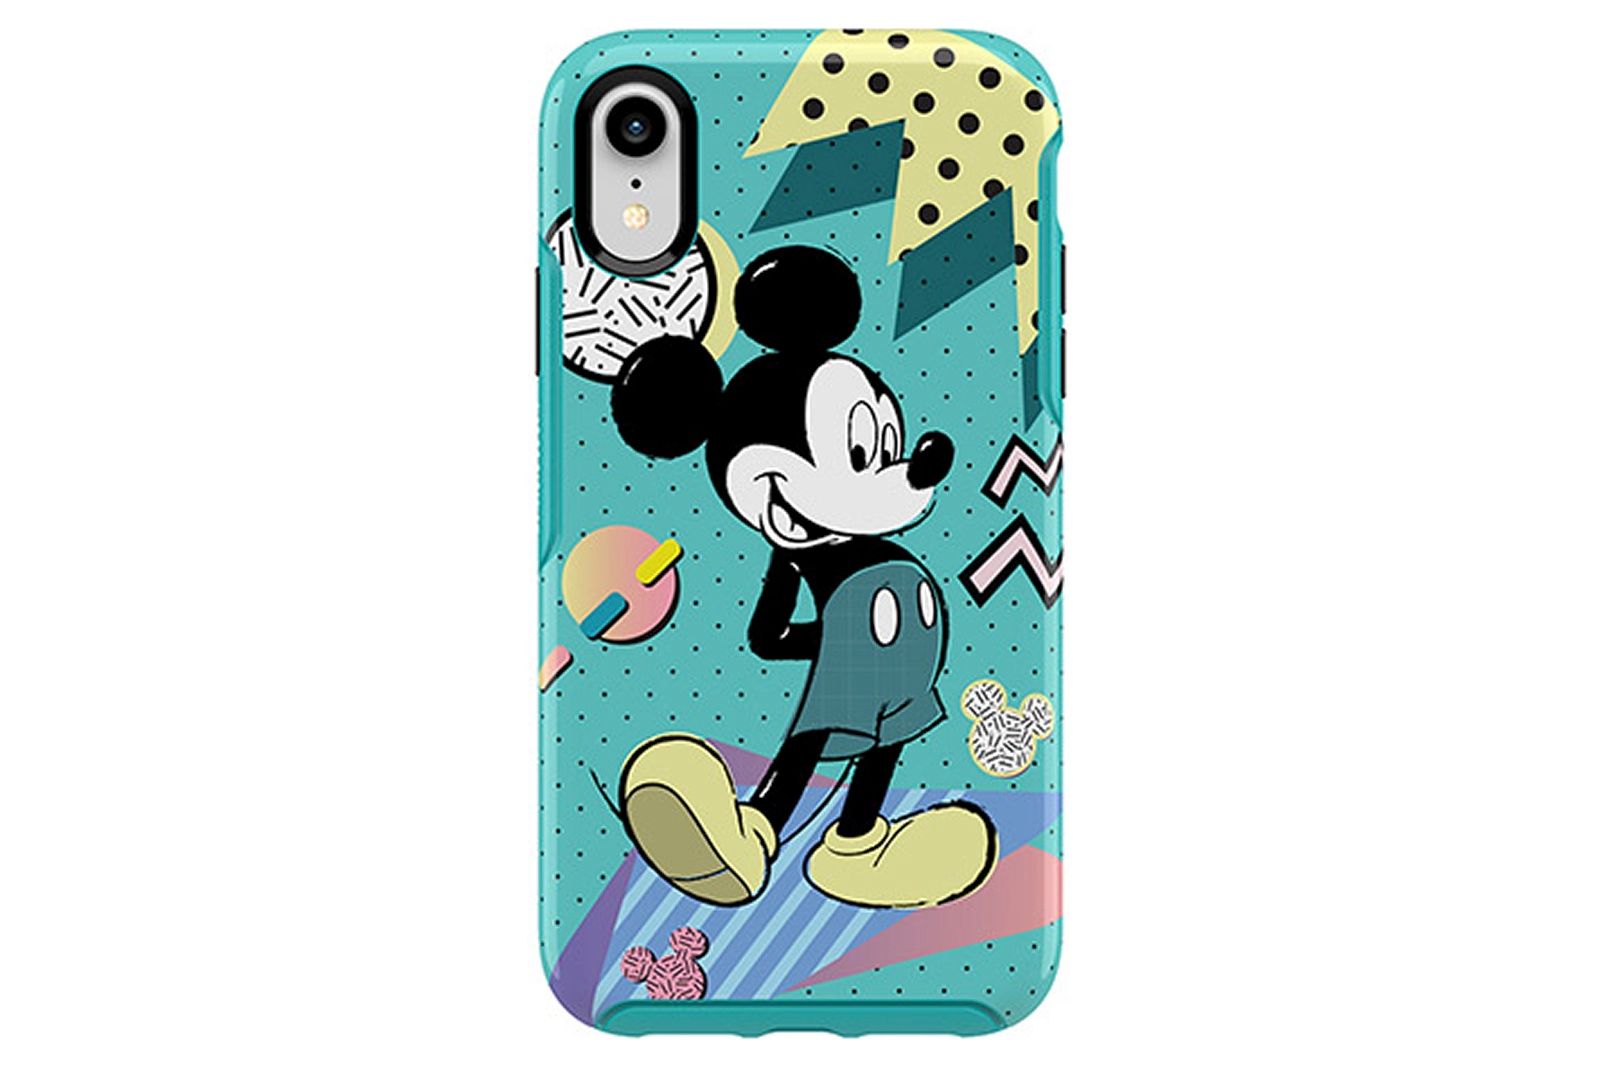 Best Disney Otterbox cases Protection fit for a Princess or a mouse image 7